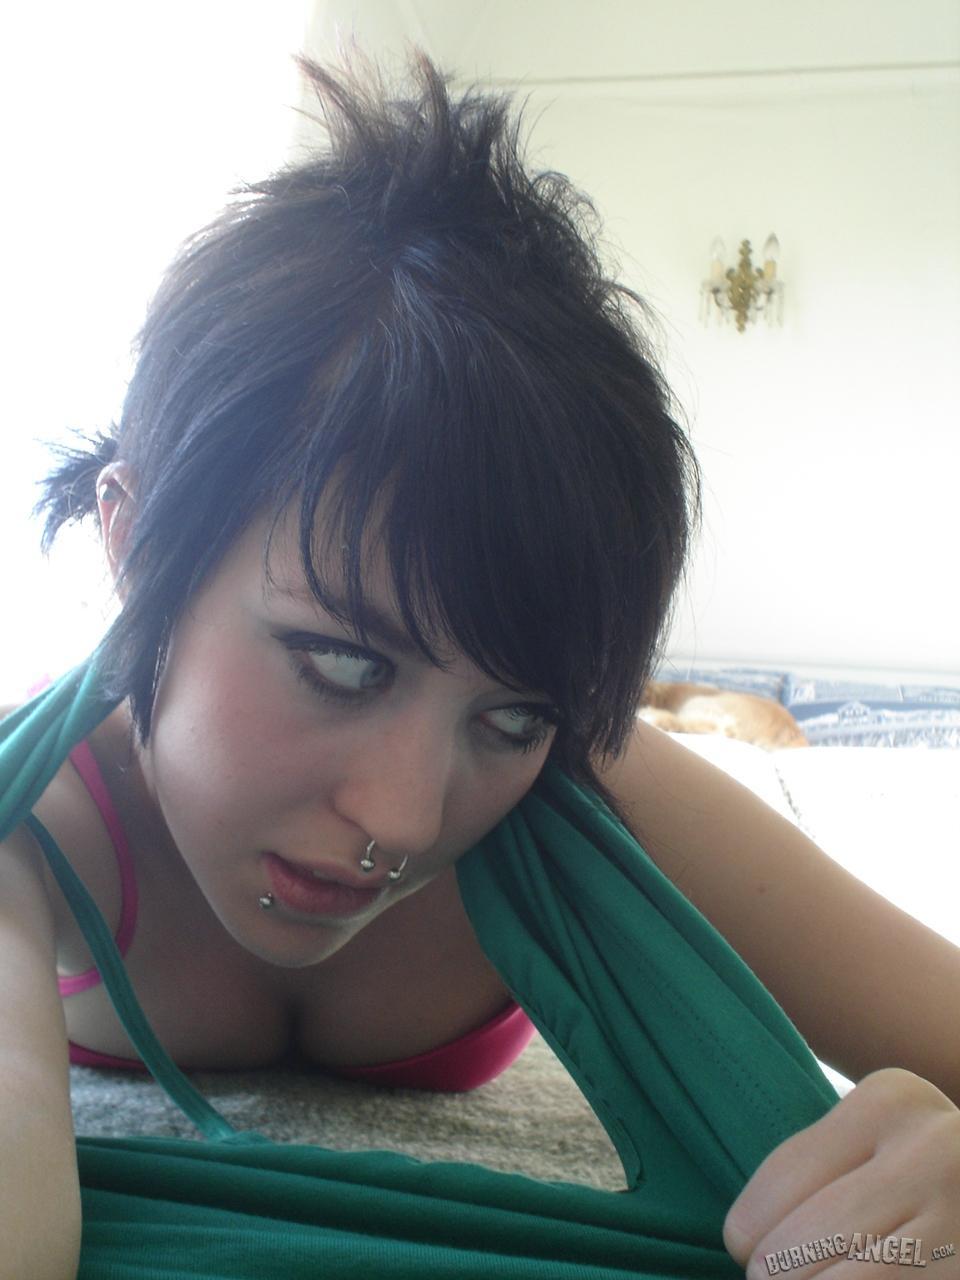 Short-haired punk chick with pierced nose, lip, navel in her own photos(8)